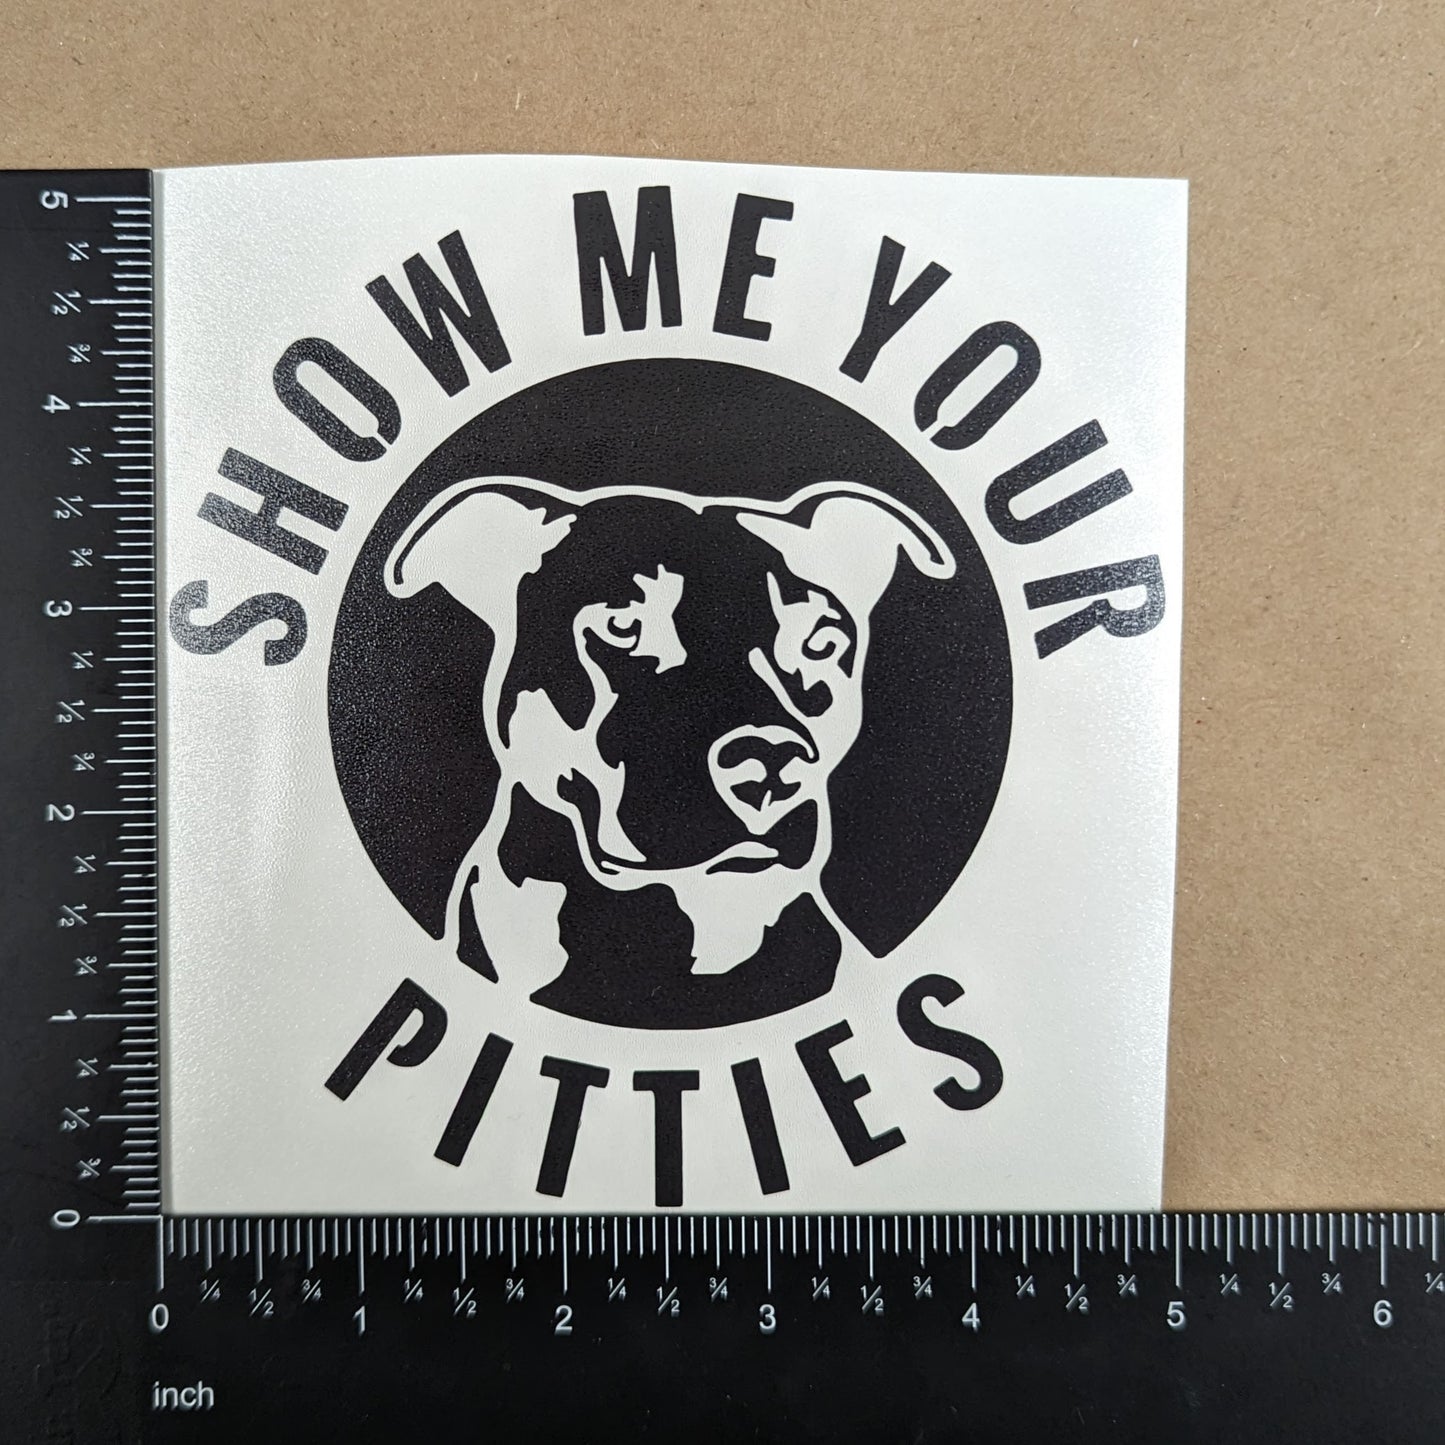 Pitbull Show Me Your Pitties Decal 4 Pack